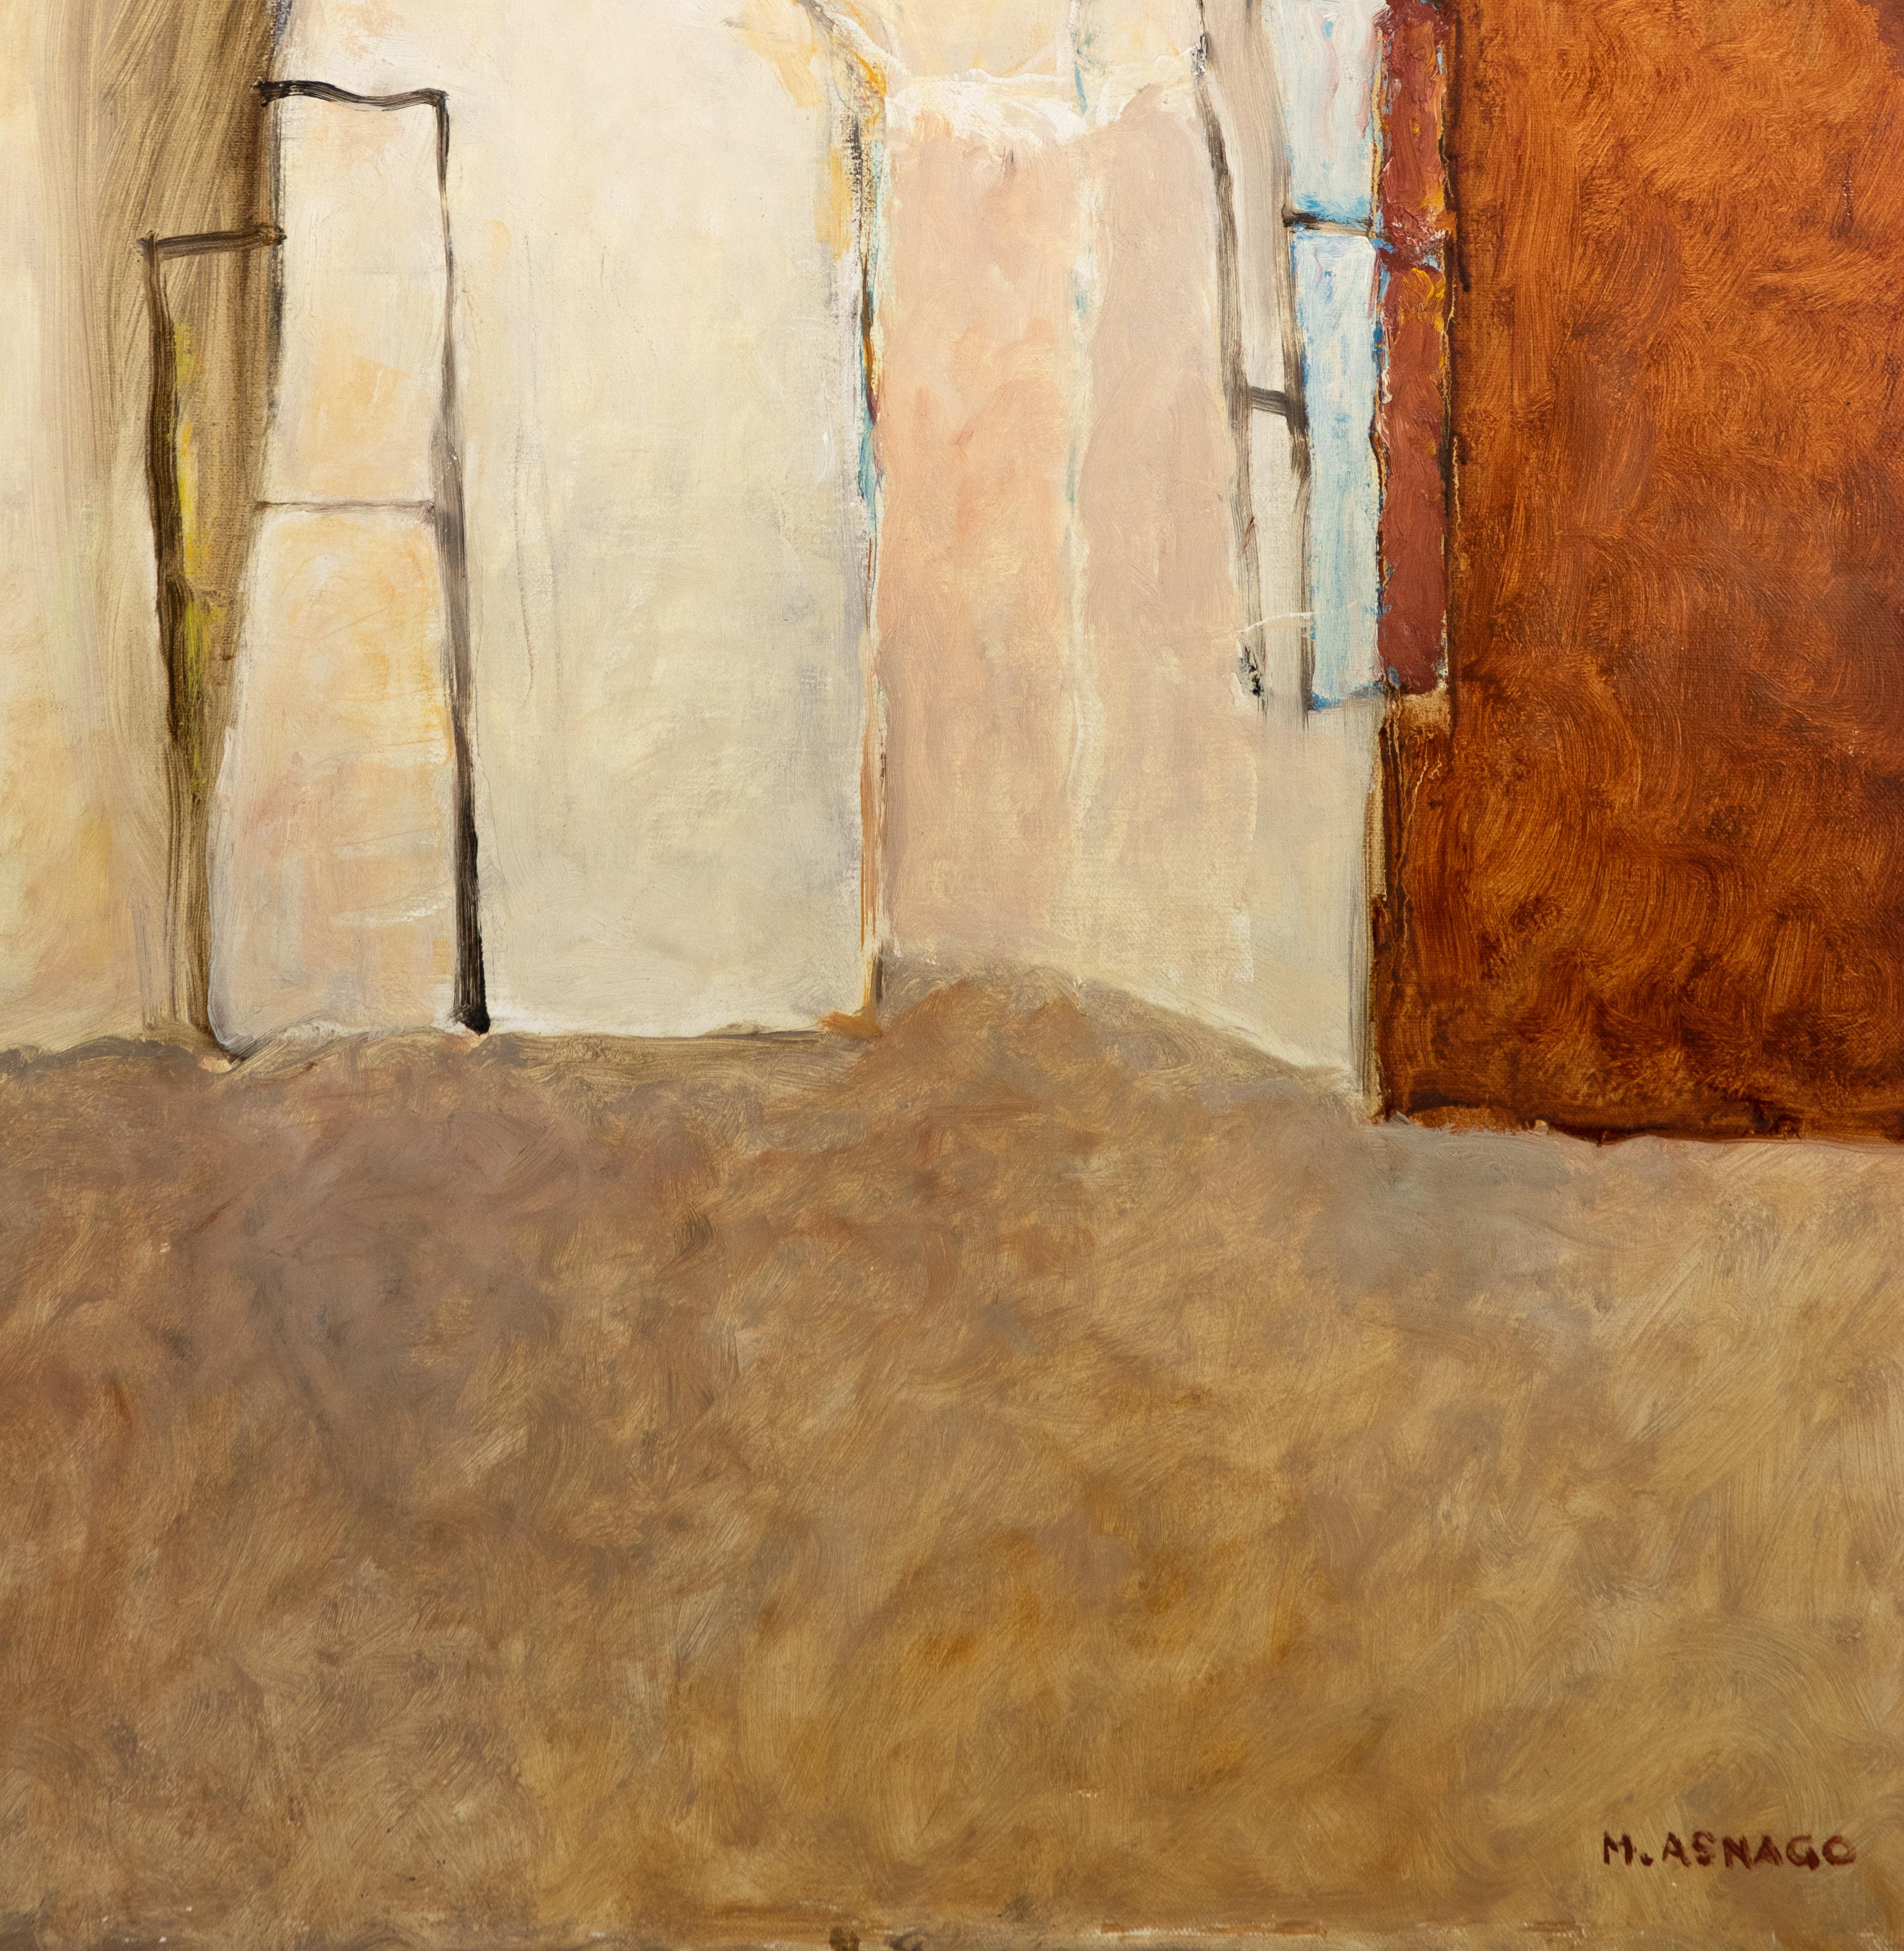 Home in the Desert - Painting by Mario Asnago - 1950s For Sale 1